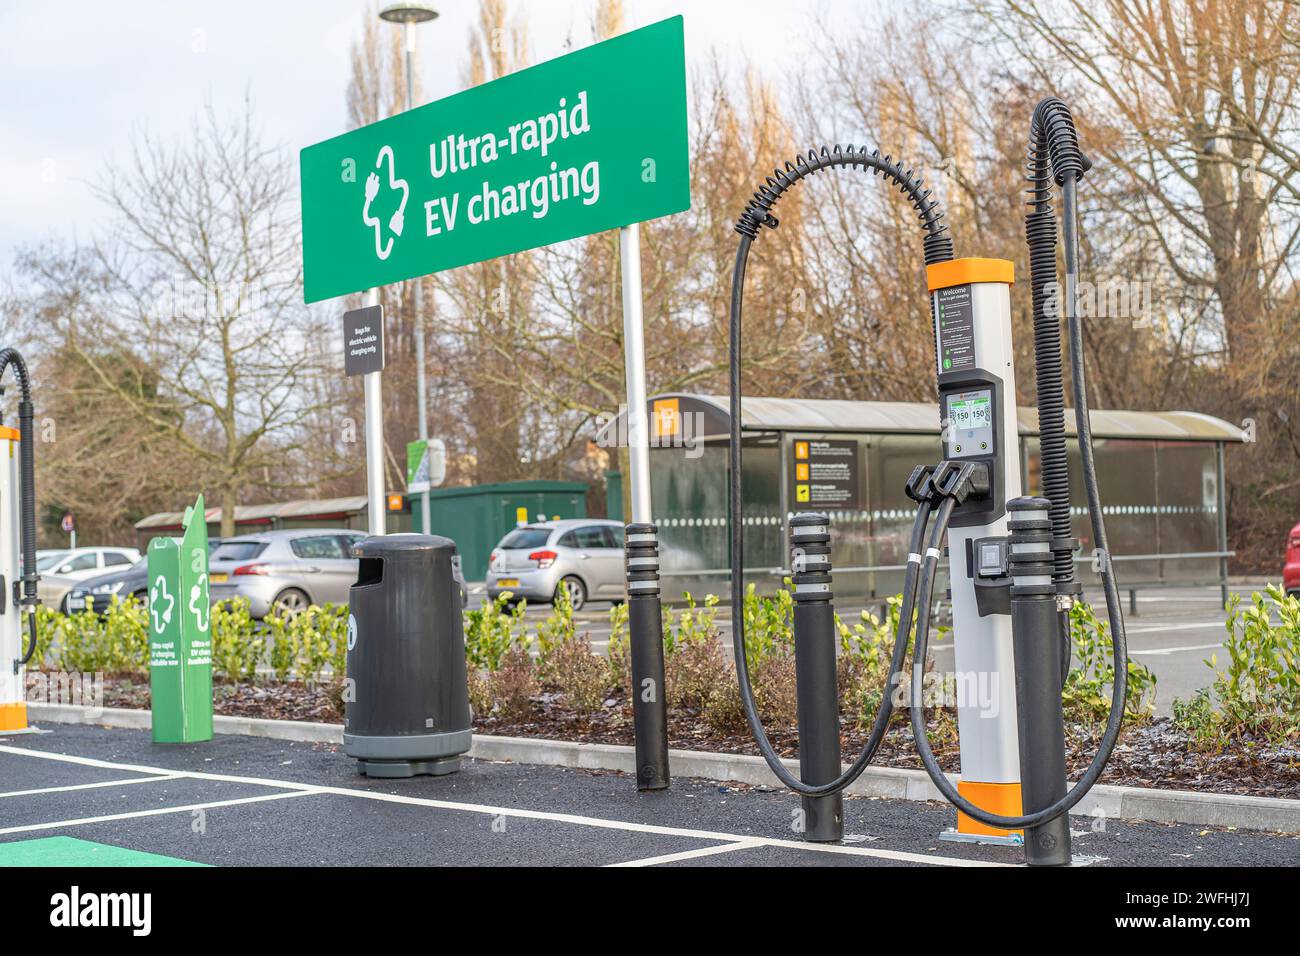 Kempower ultra-rapid electric vehicle charging point at a Sainsbury's supermarket car park. Stock Photo